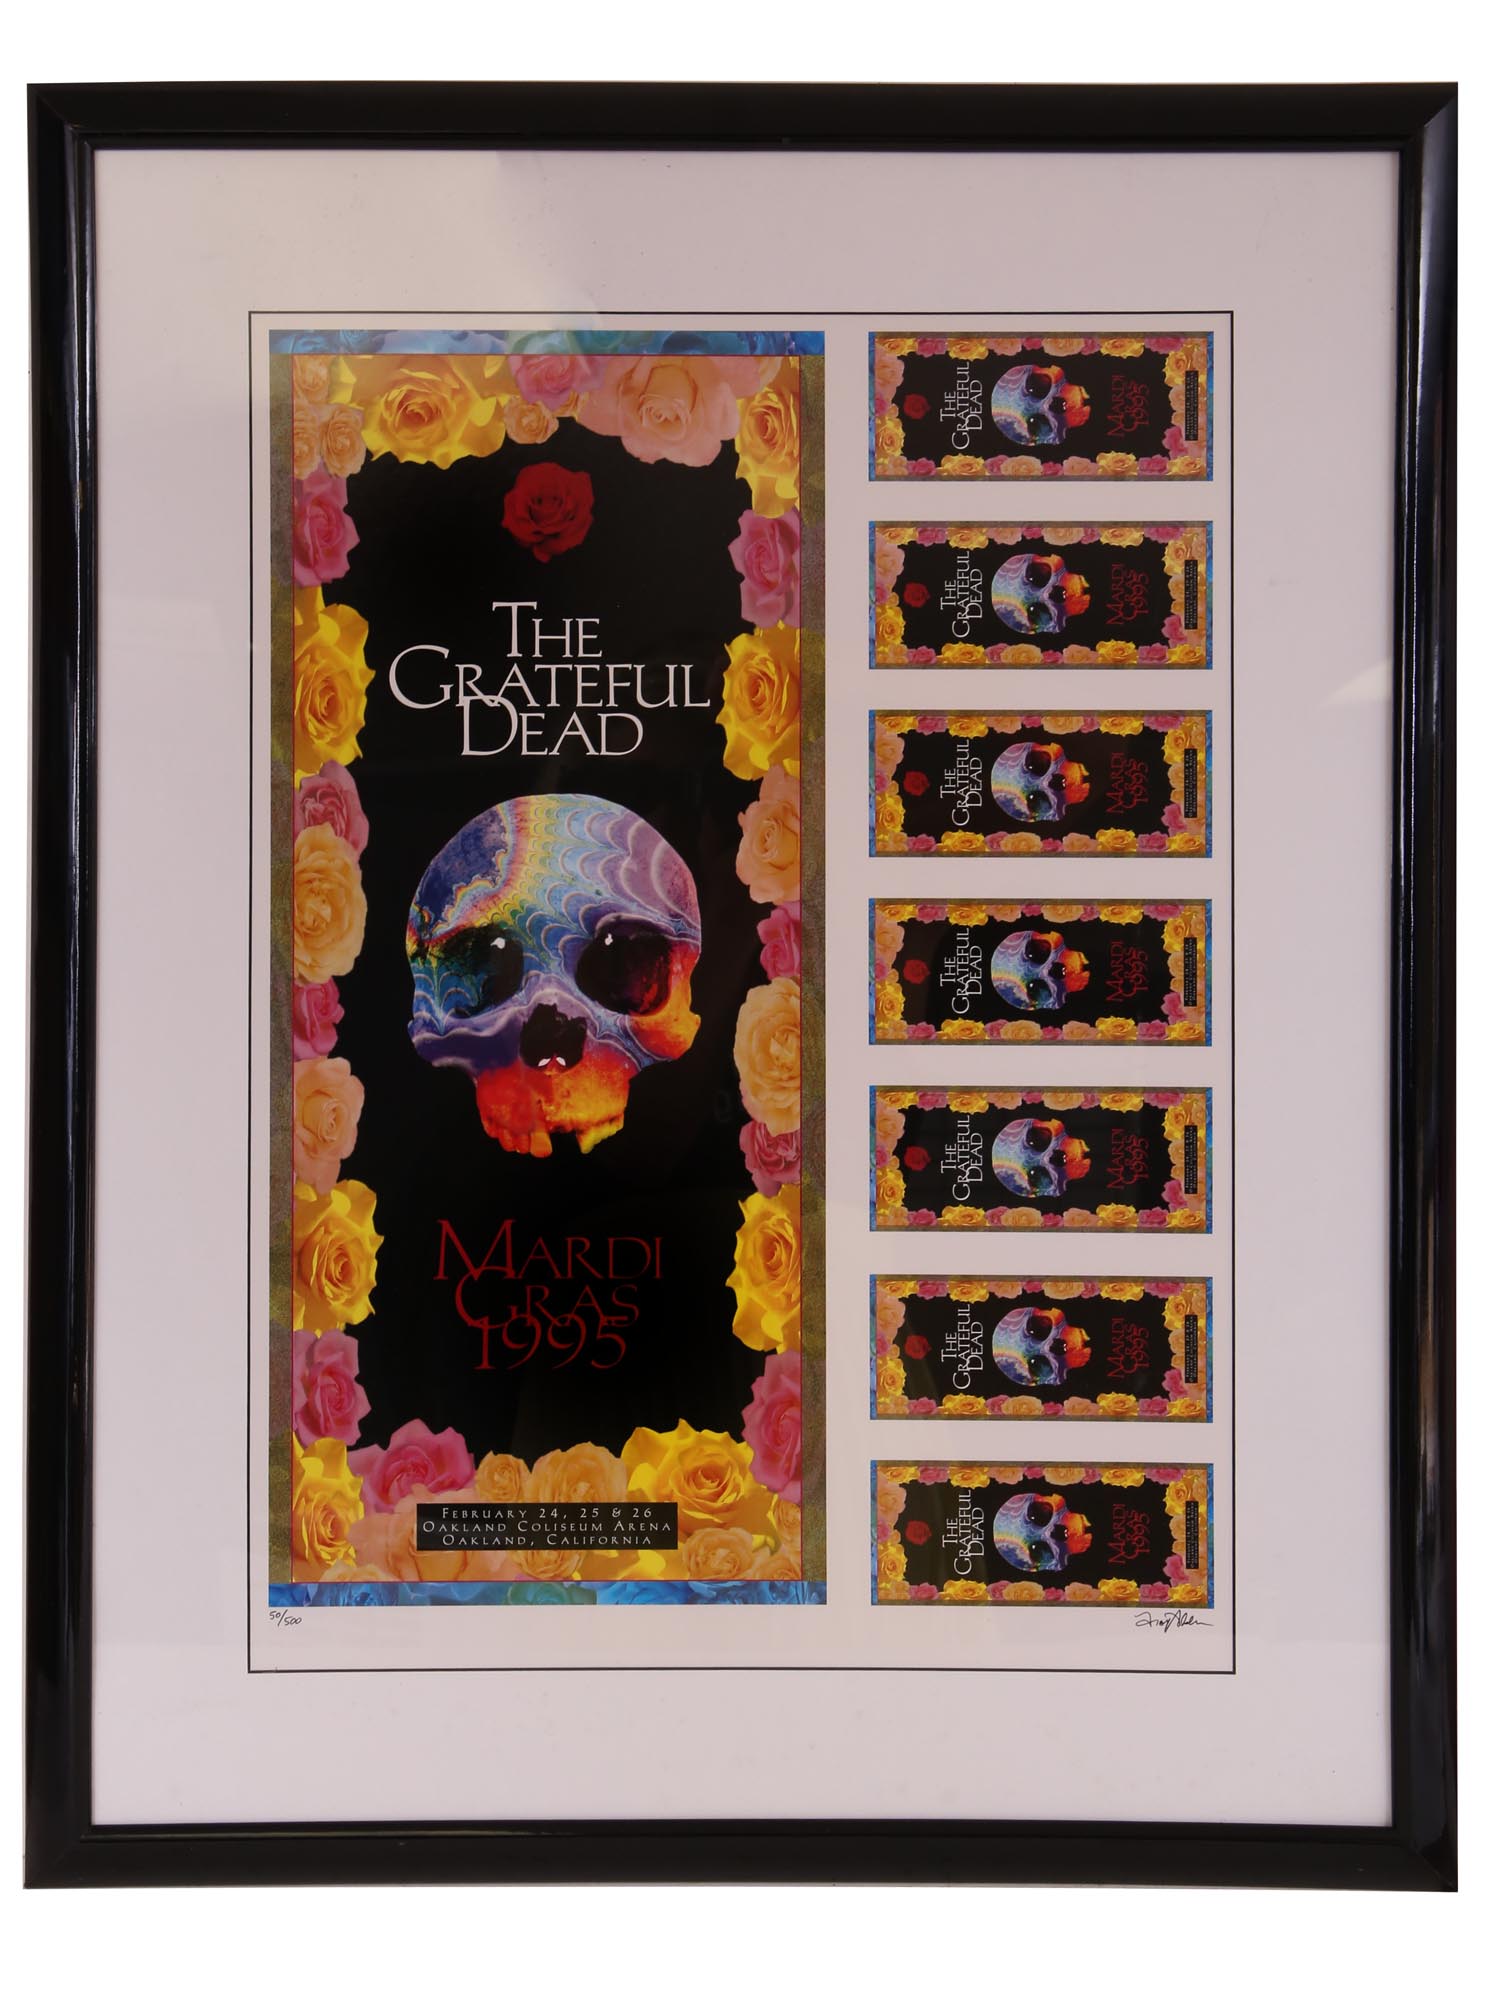 A GREAT DEAD MARDI GRAS 1995 SIGNED POSTER PIC-0